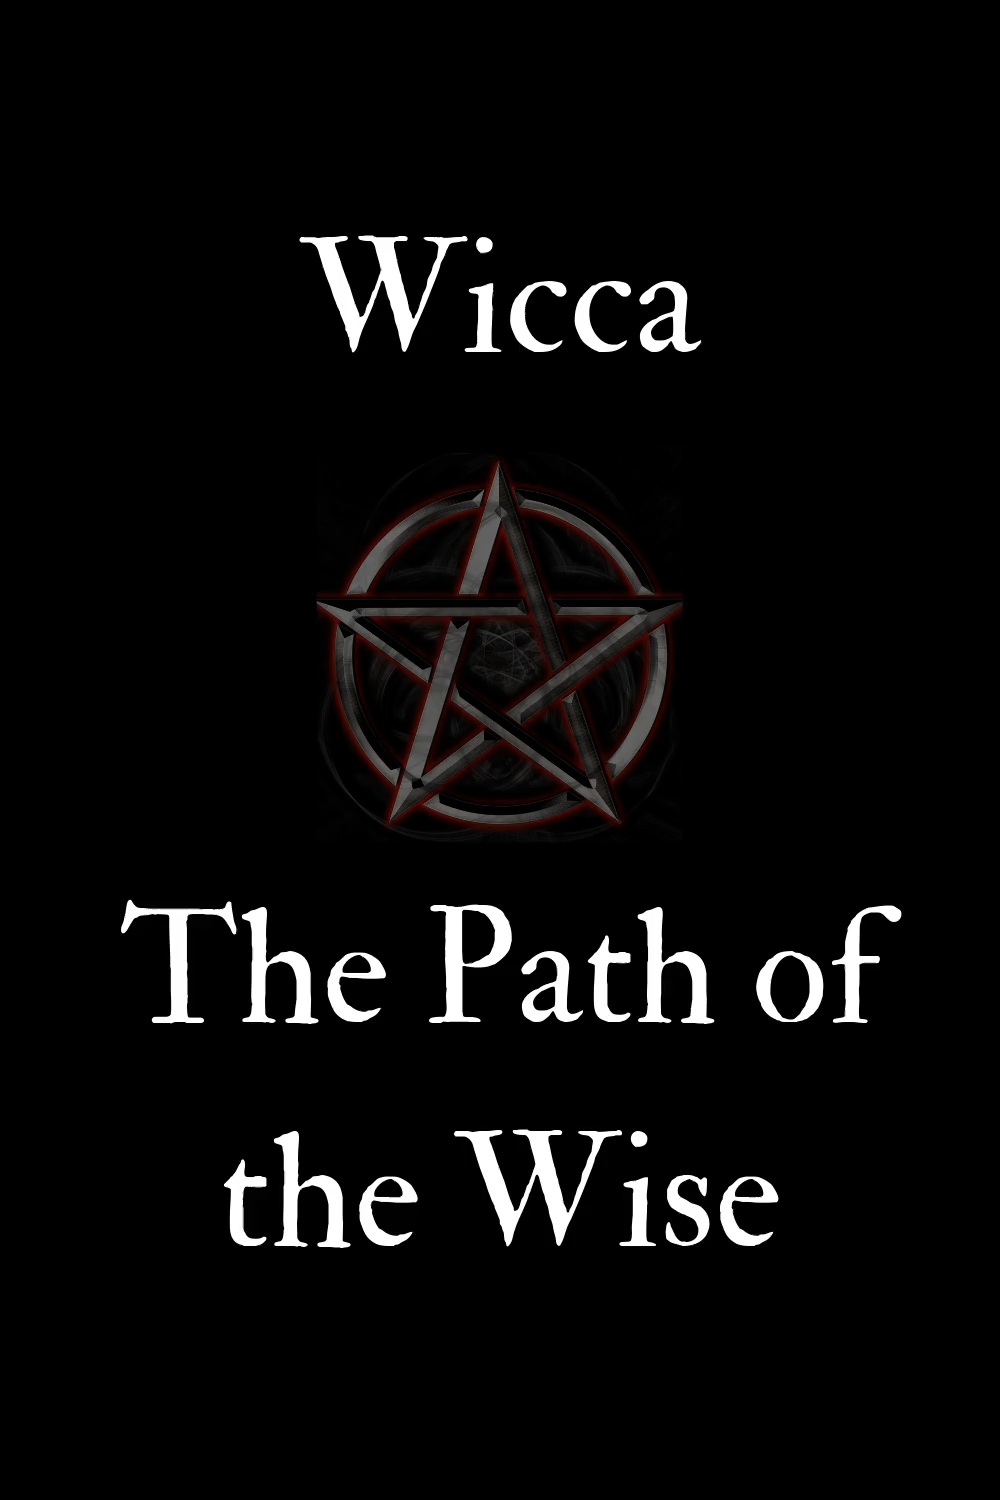 Wicca - Wicca -   18 beauty Secrets quotes ideas